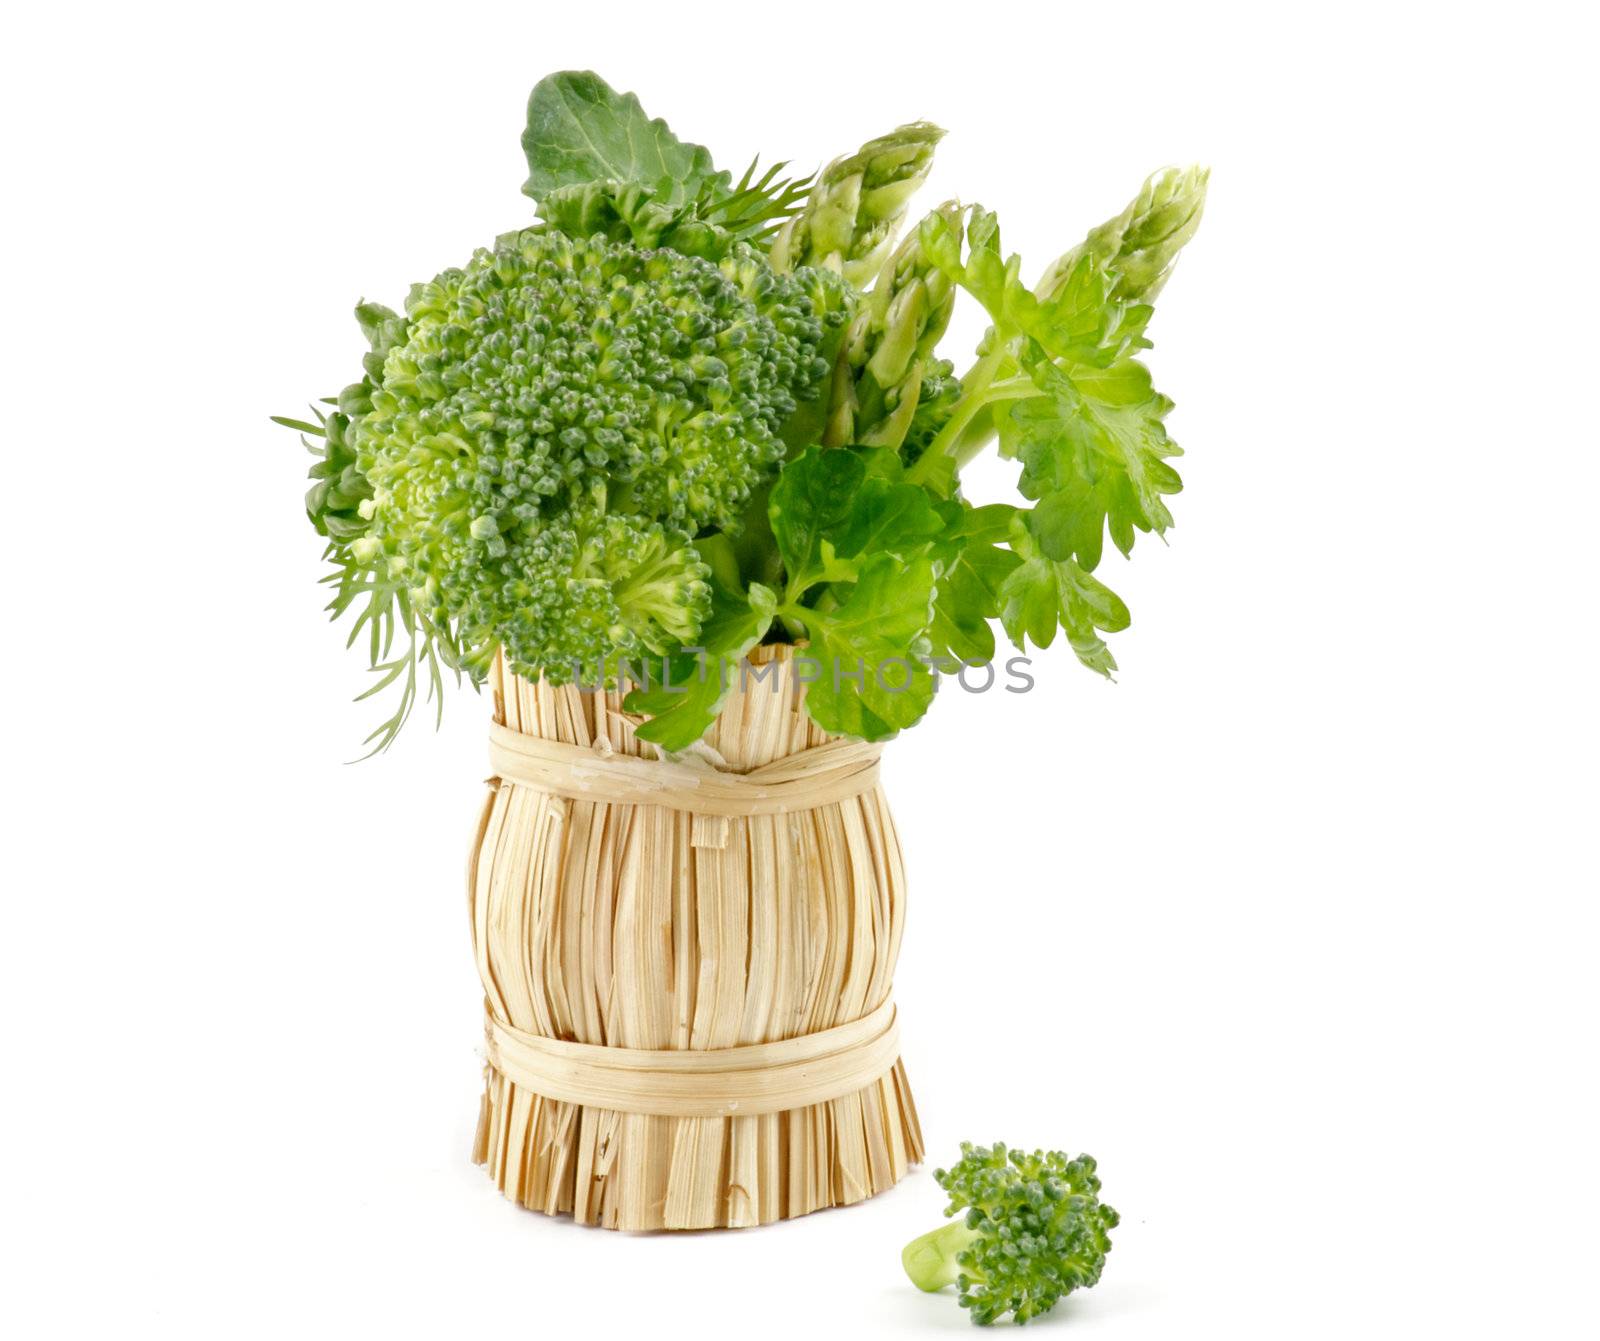 Bouquet of broccoli, asparagus, dill, parsley in wicker basket isolated on white background